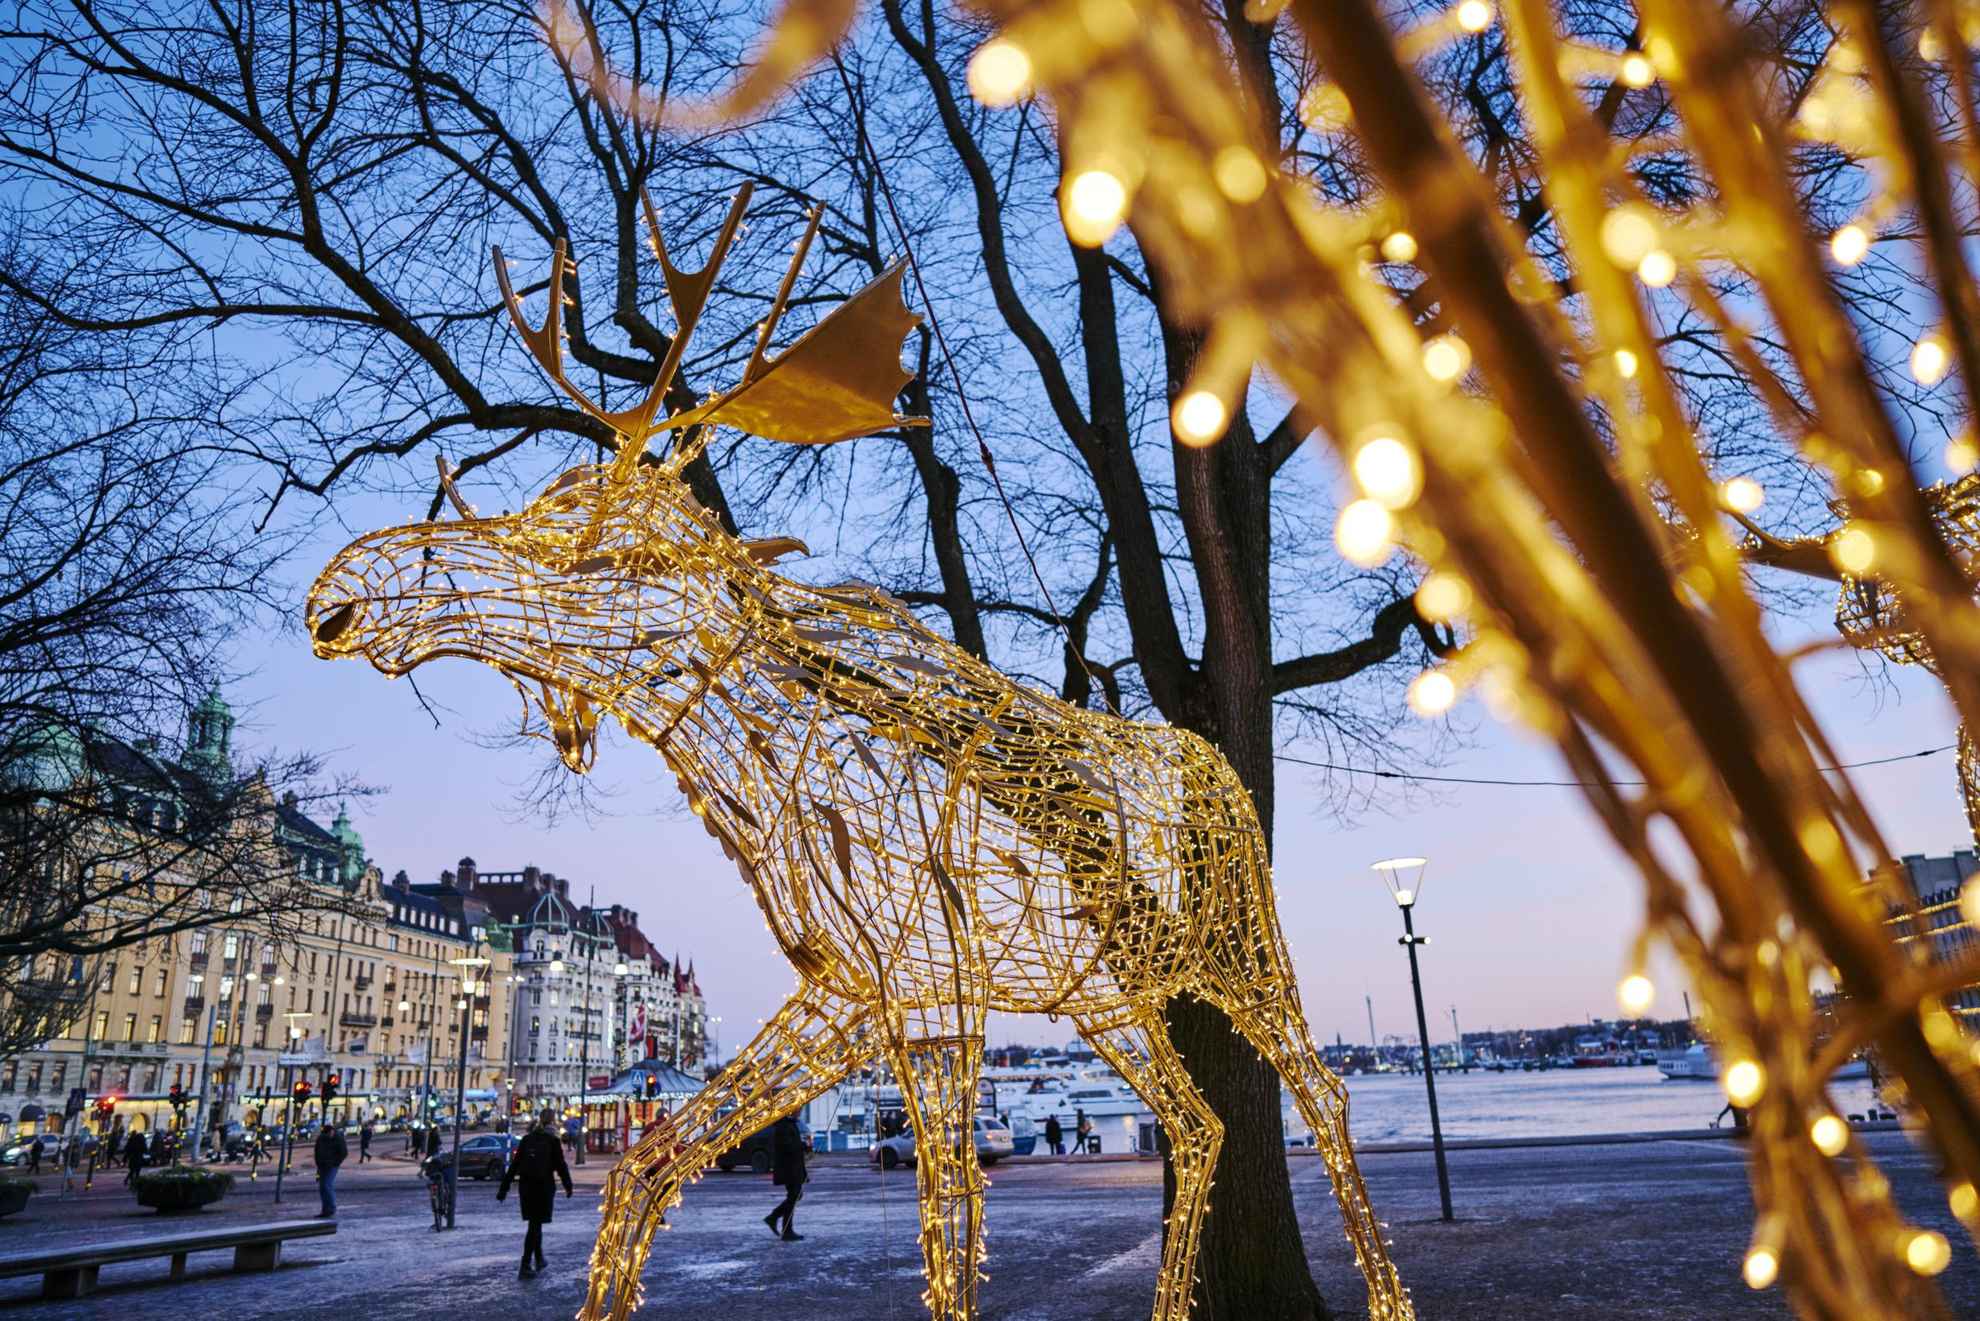 A moose built out of wires and lights stands in a park in a city by the water.